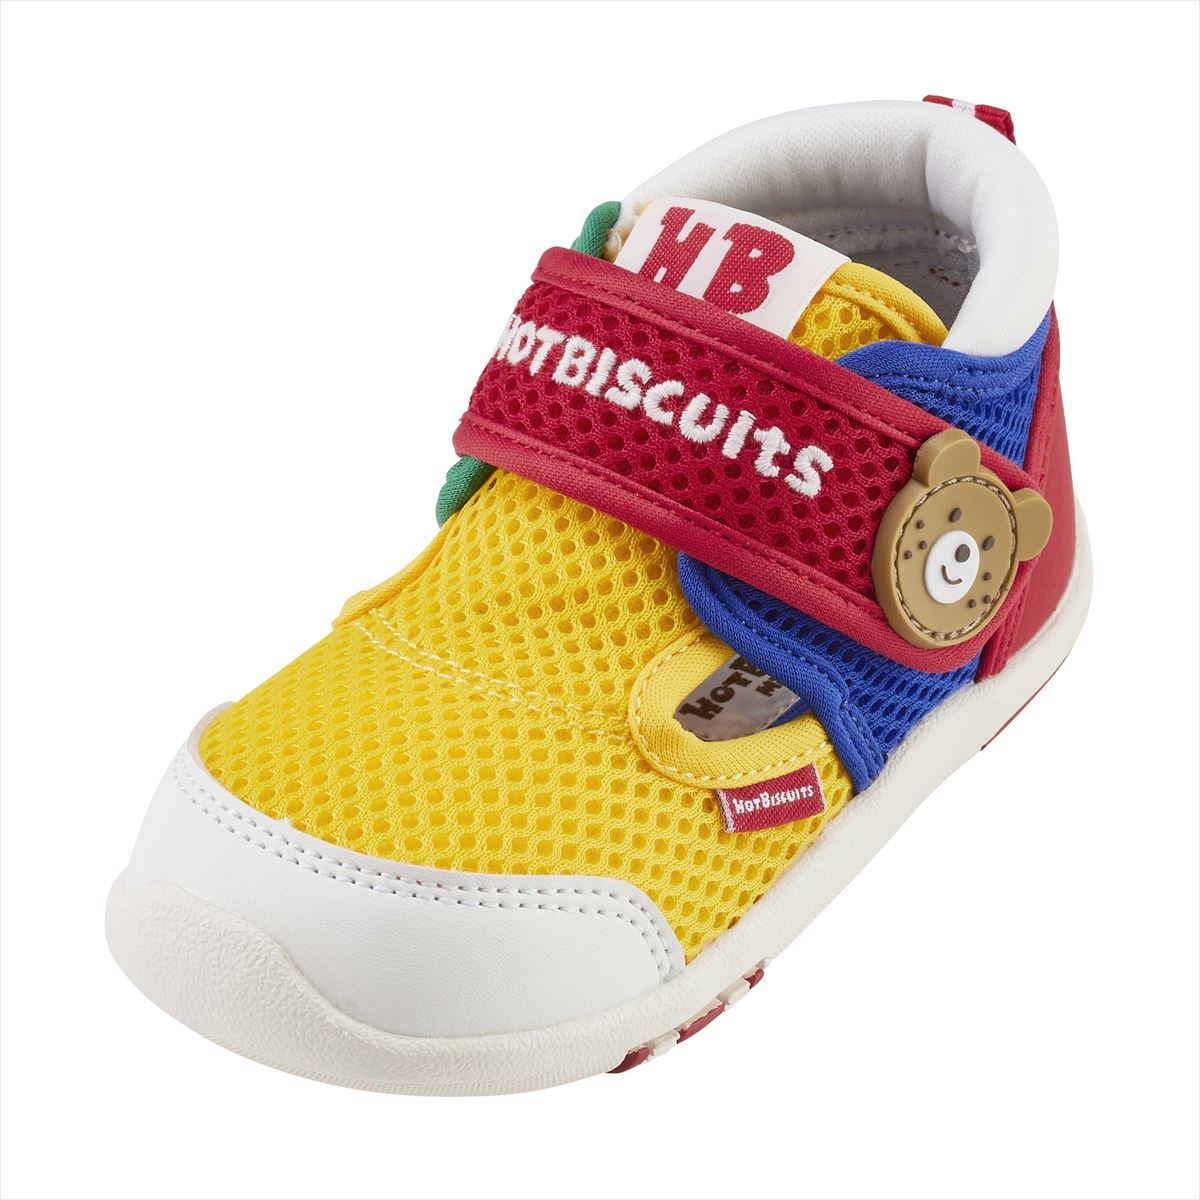 Double Russell Mesh Second Shoes - HB Energy